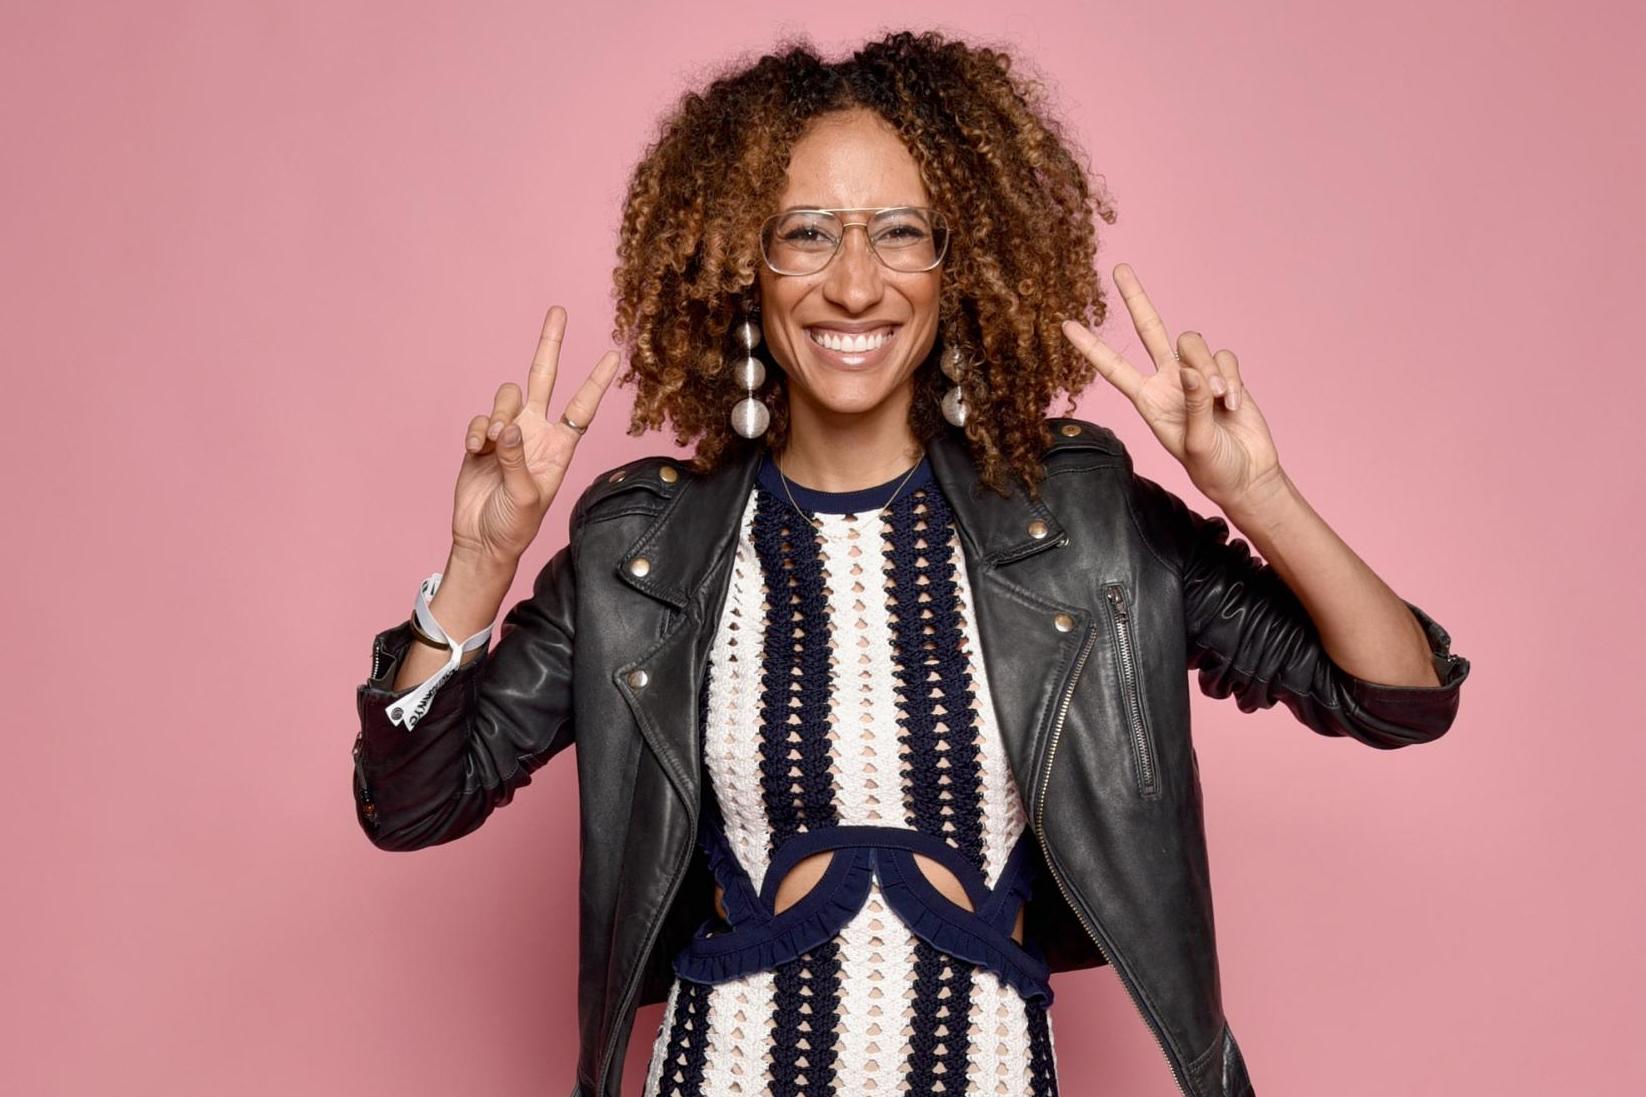 Teen Vogue editor-in-chief Elaine Welteroth at Beautycon Festival NYC 2017